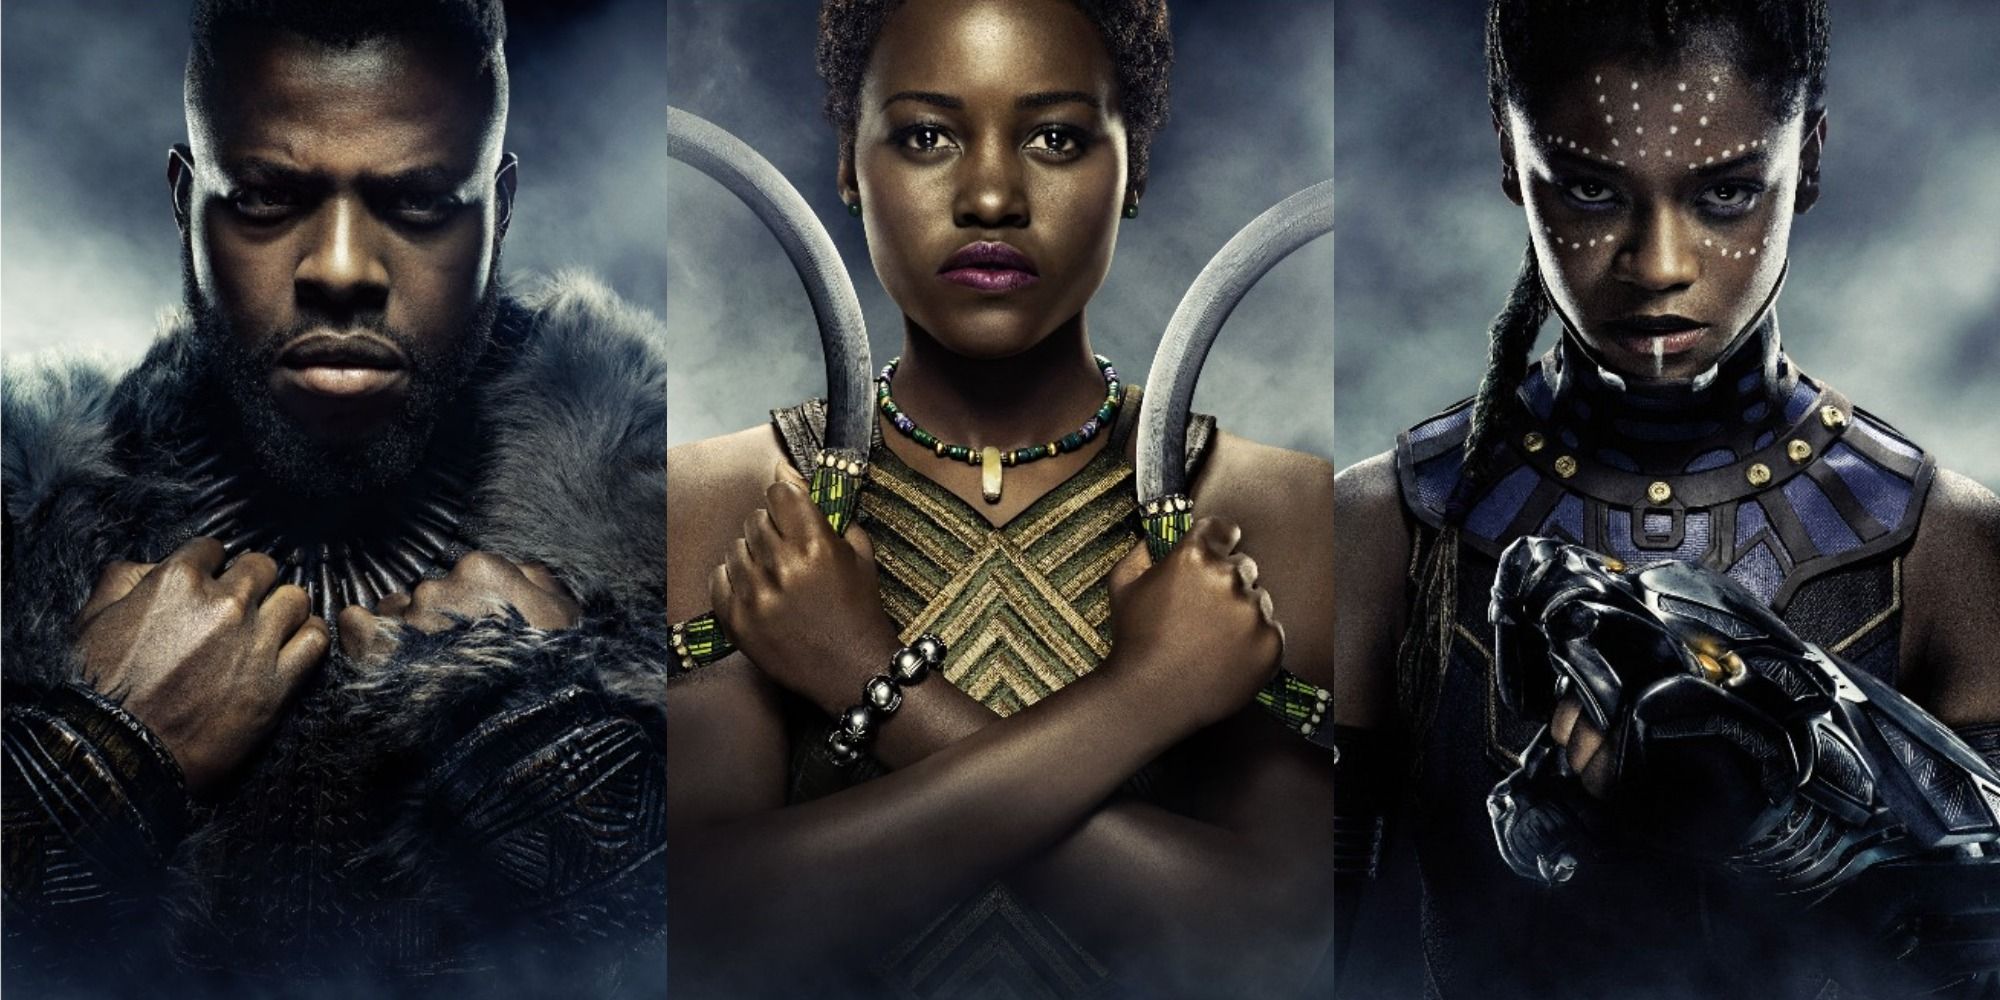 MCU: Every Character That Could Be The Next Black Panther